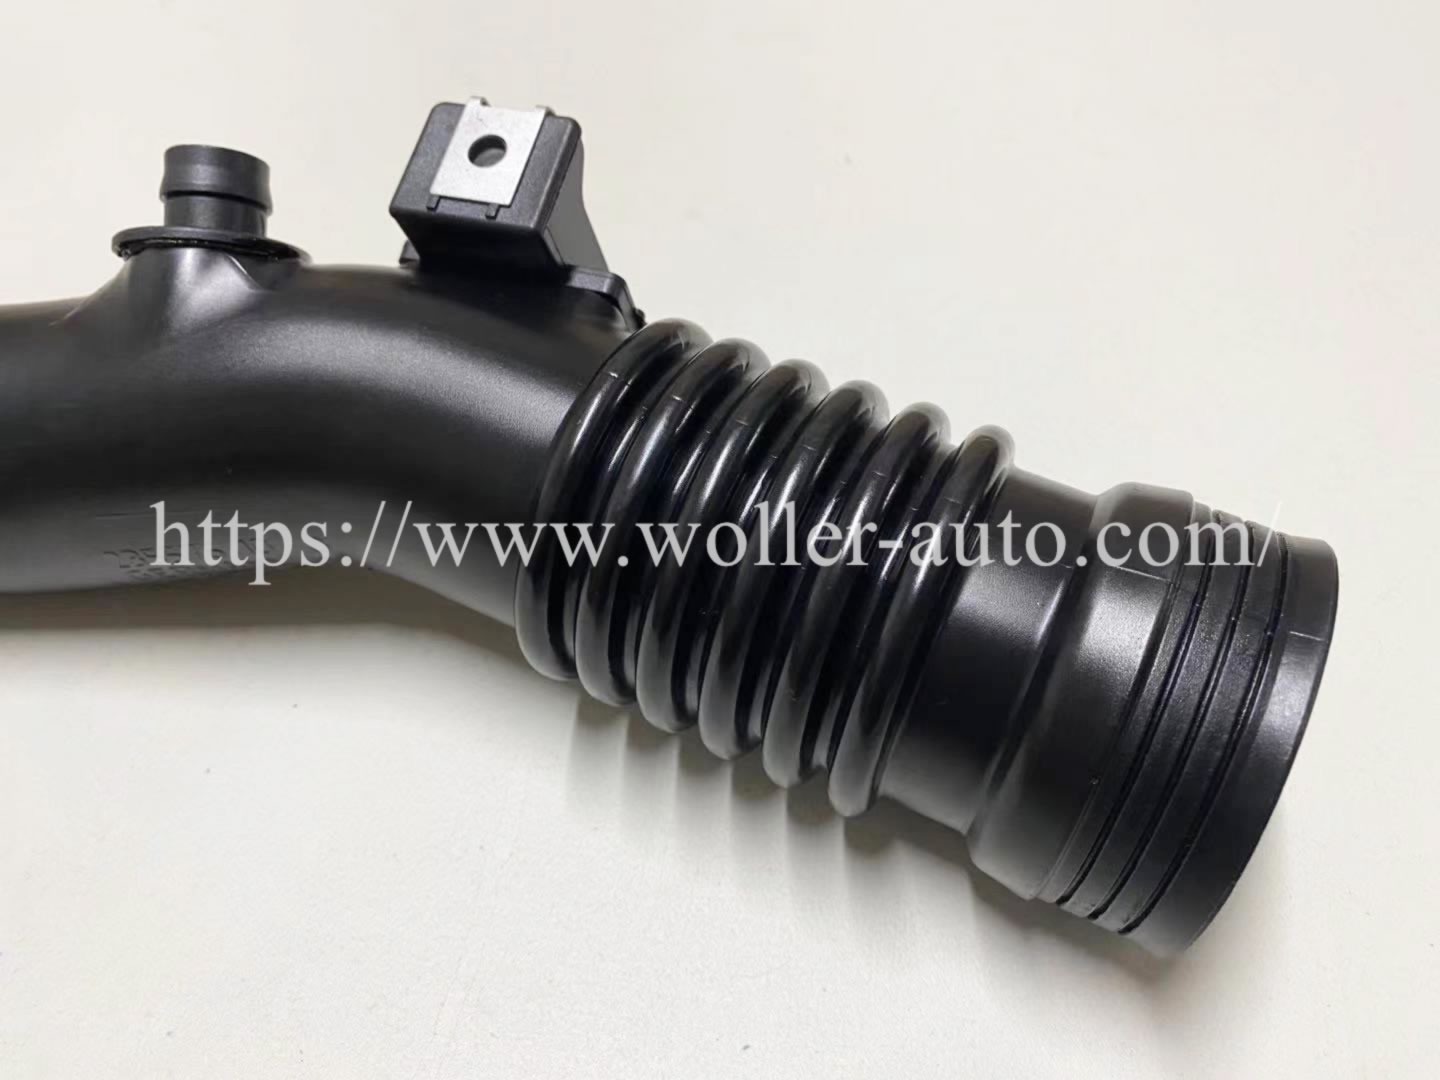 Turbo Charge Air Induction Pipe OE 13717588268 13717609811 For BMW X5 X6 F01 F02 F07 F10 F18 E70 E71 E72